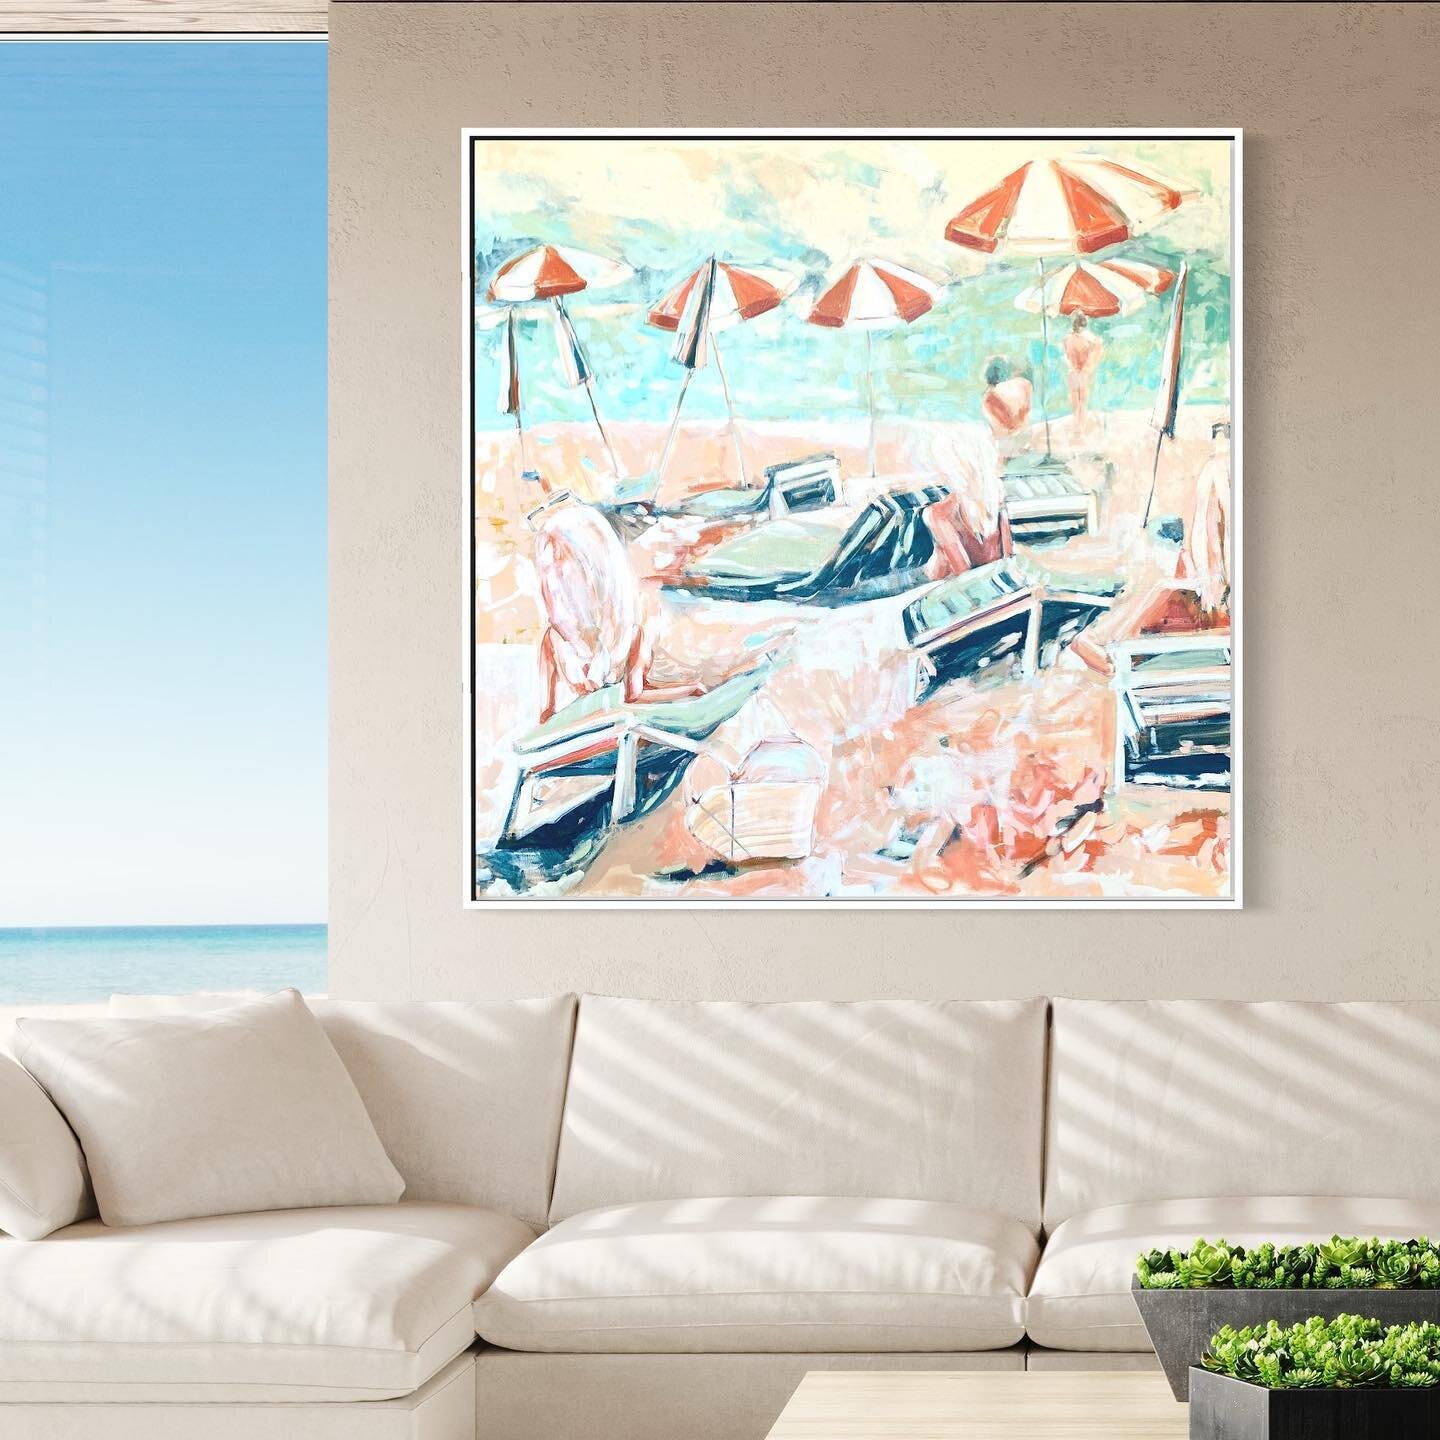 Part of my new series, Sunbathing in the Sixties. 48x48 available framed, in a gloss white float frame. DM me for pricing and delivery options ☀️
.
.
.
.
.
.
.
.
#newwork #artoftheday #costal #beachstyle #bathingbeauty #largeart #interiordesigner